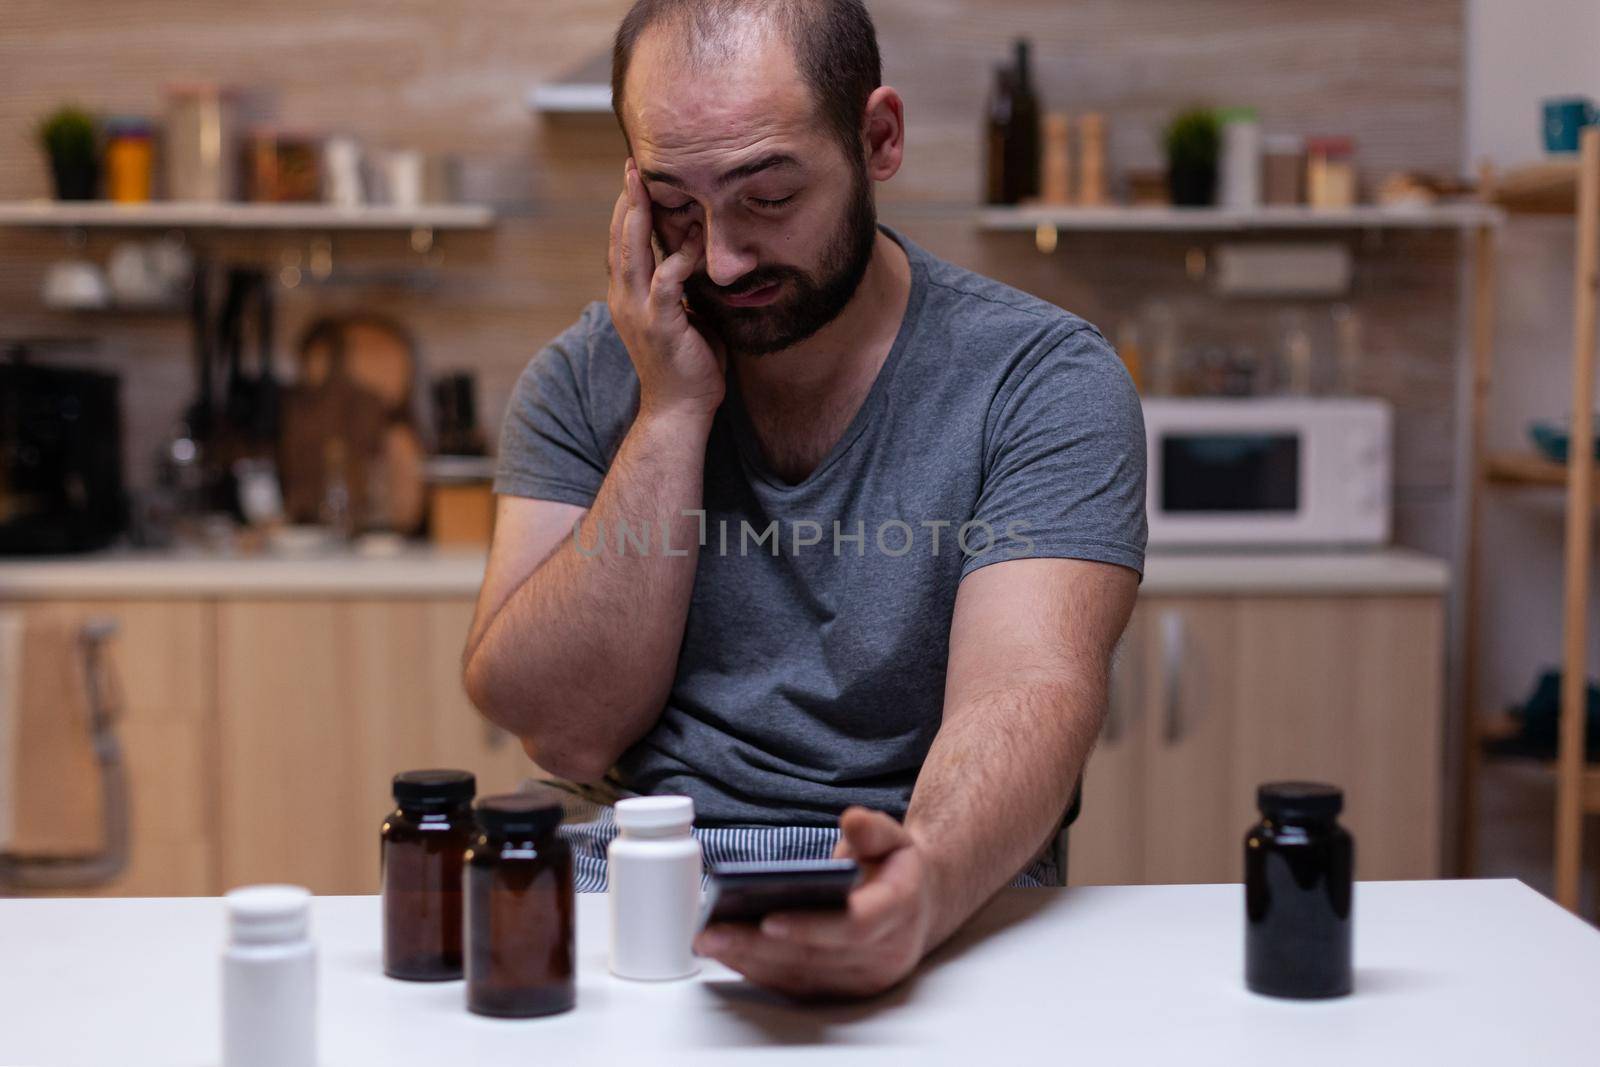 Caucasian man with headache looking at smartphone holding bottle of pills for pain remedy, treatment, medication, medicine. Adult with migraine having container with medical drugs